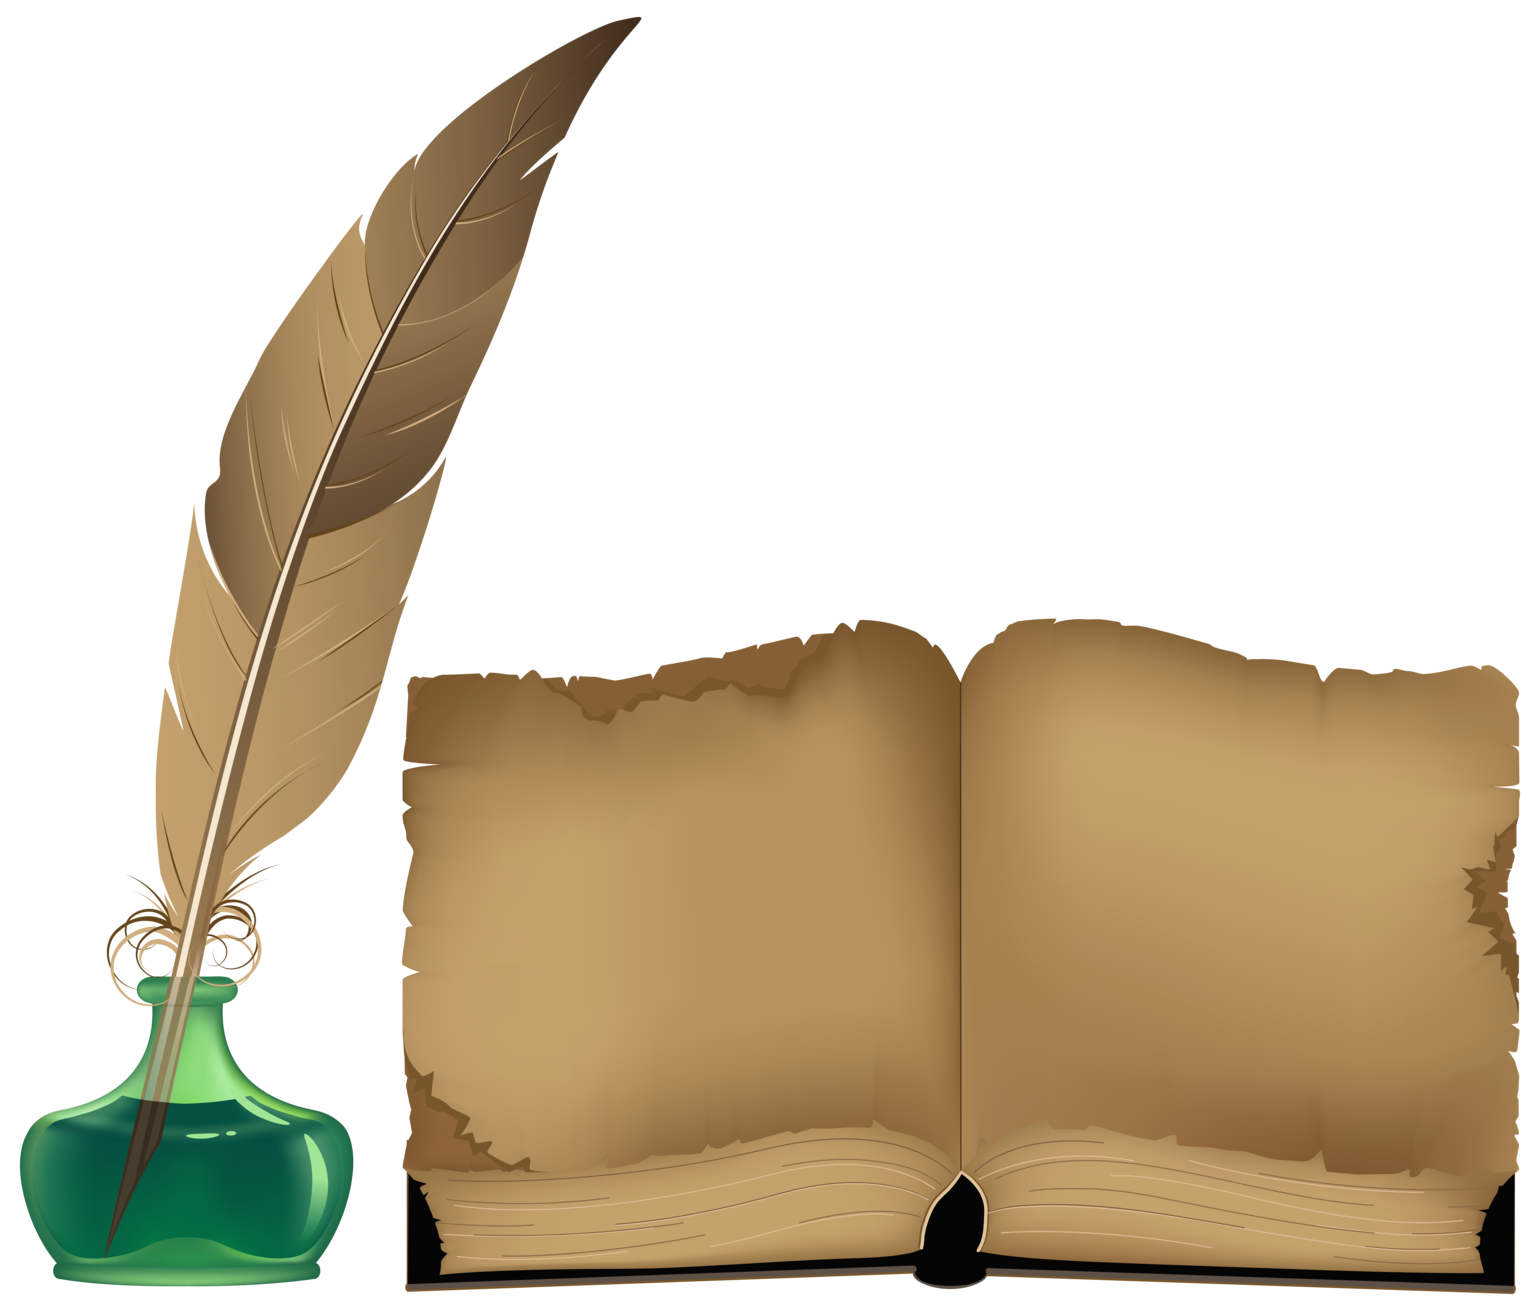 Ancient book and inkwell. Wing clipart old